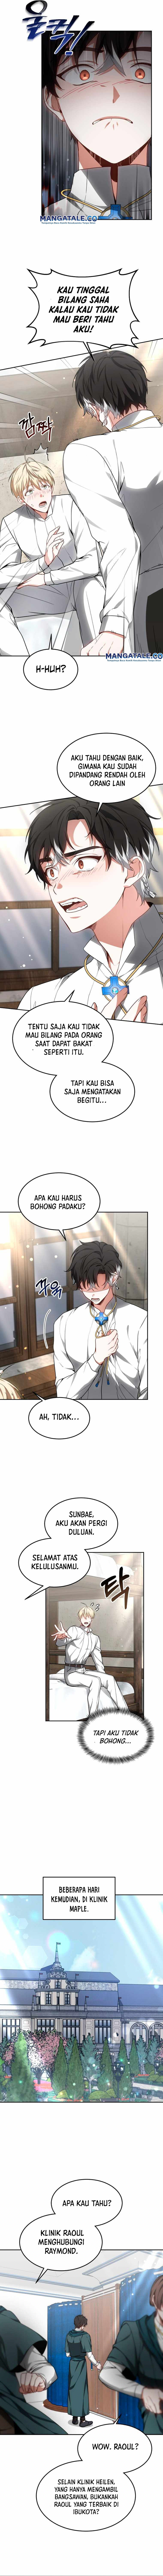 Dr. Player Chapter 17 10